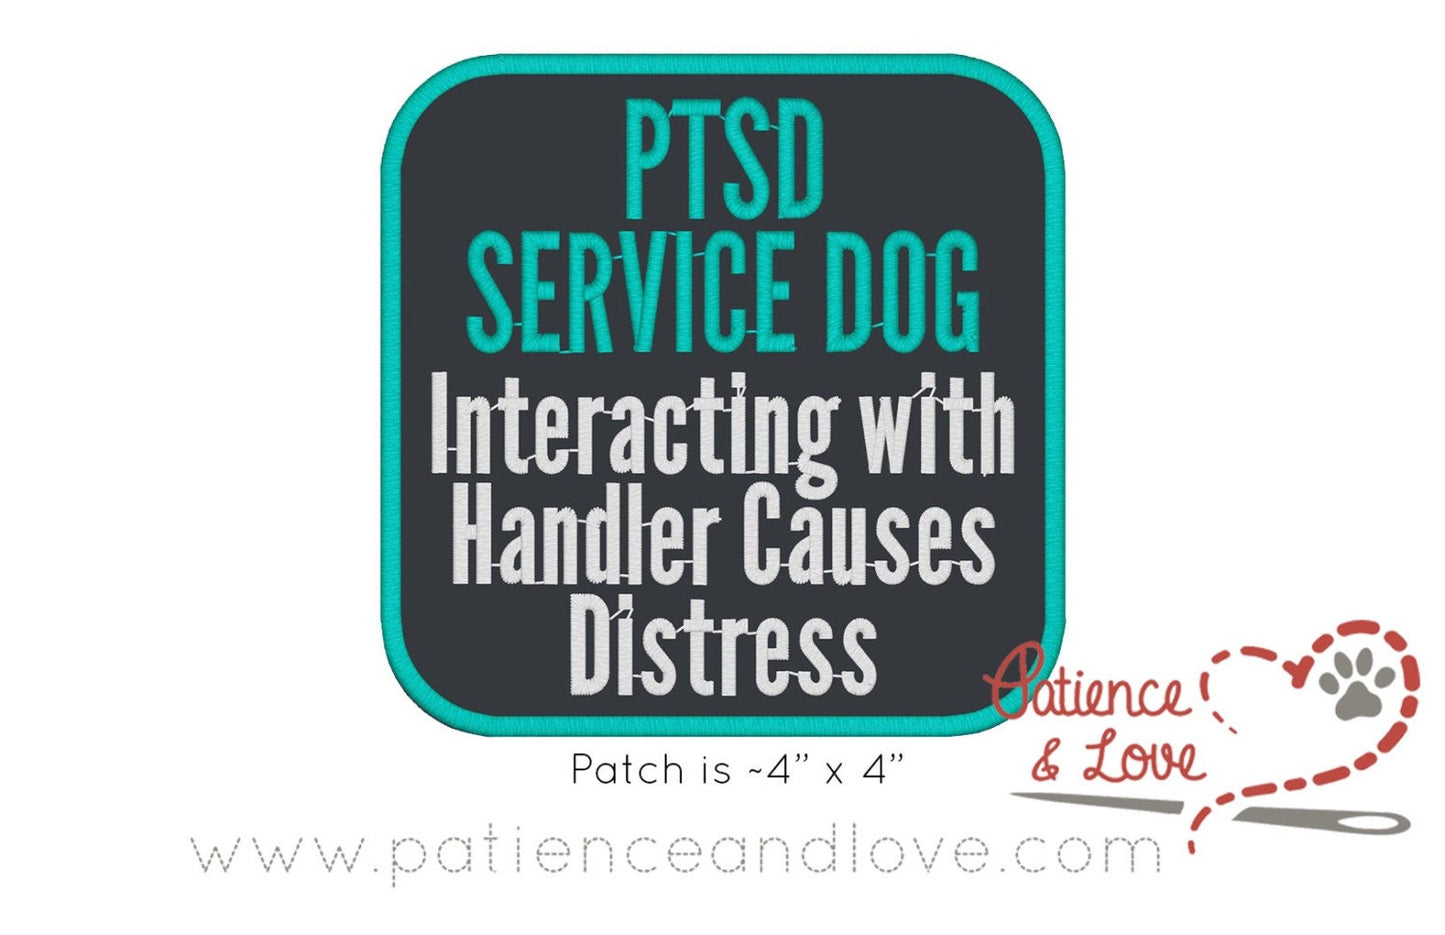 PTSD Service Dog, Interacting with handler causes distress, 4 inch x 4 inch patch